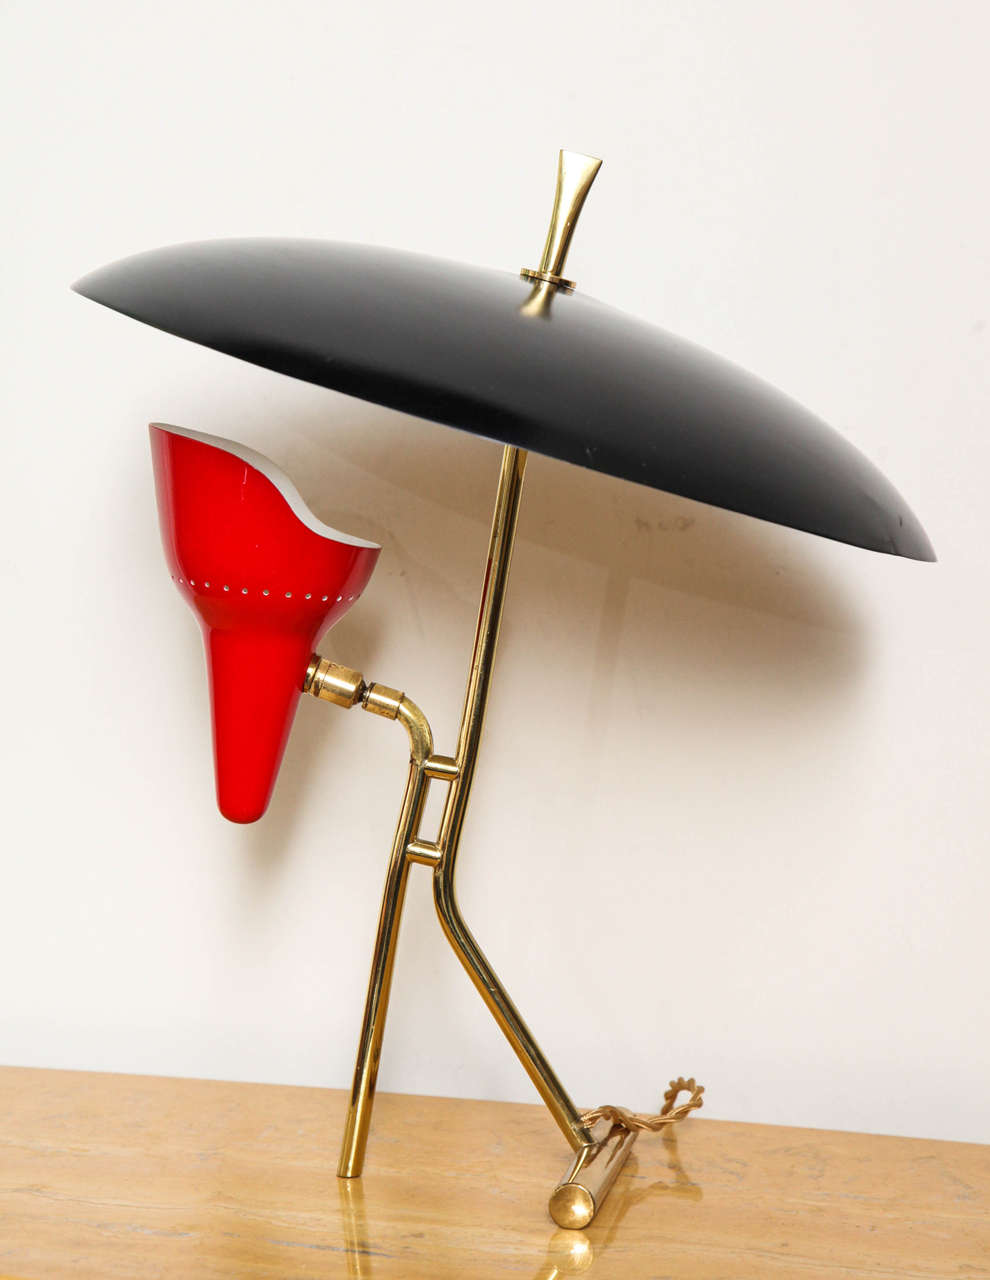 Wonderful desk lamp made in Milan, 1955, small red shade is adjustable as is the black reflector, great quality, rare form.